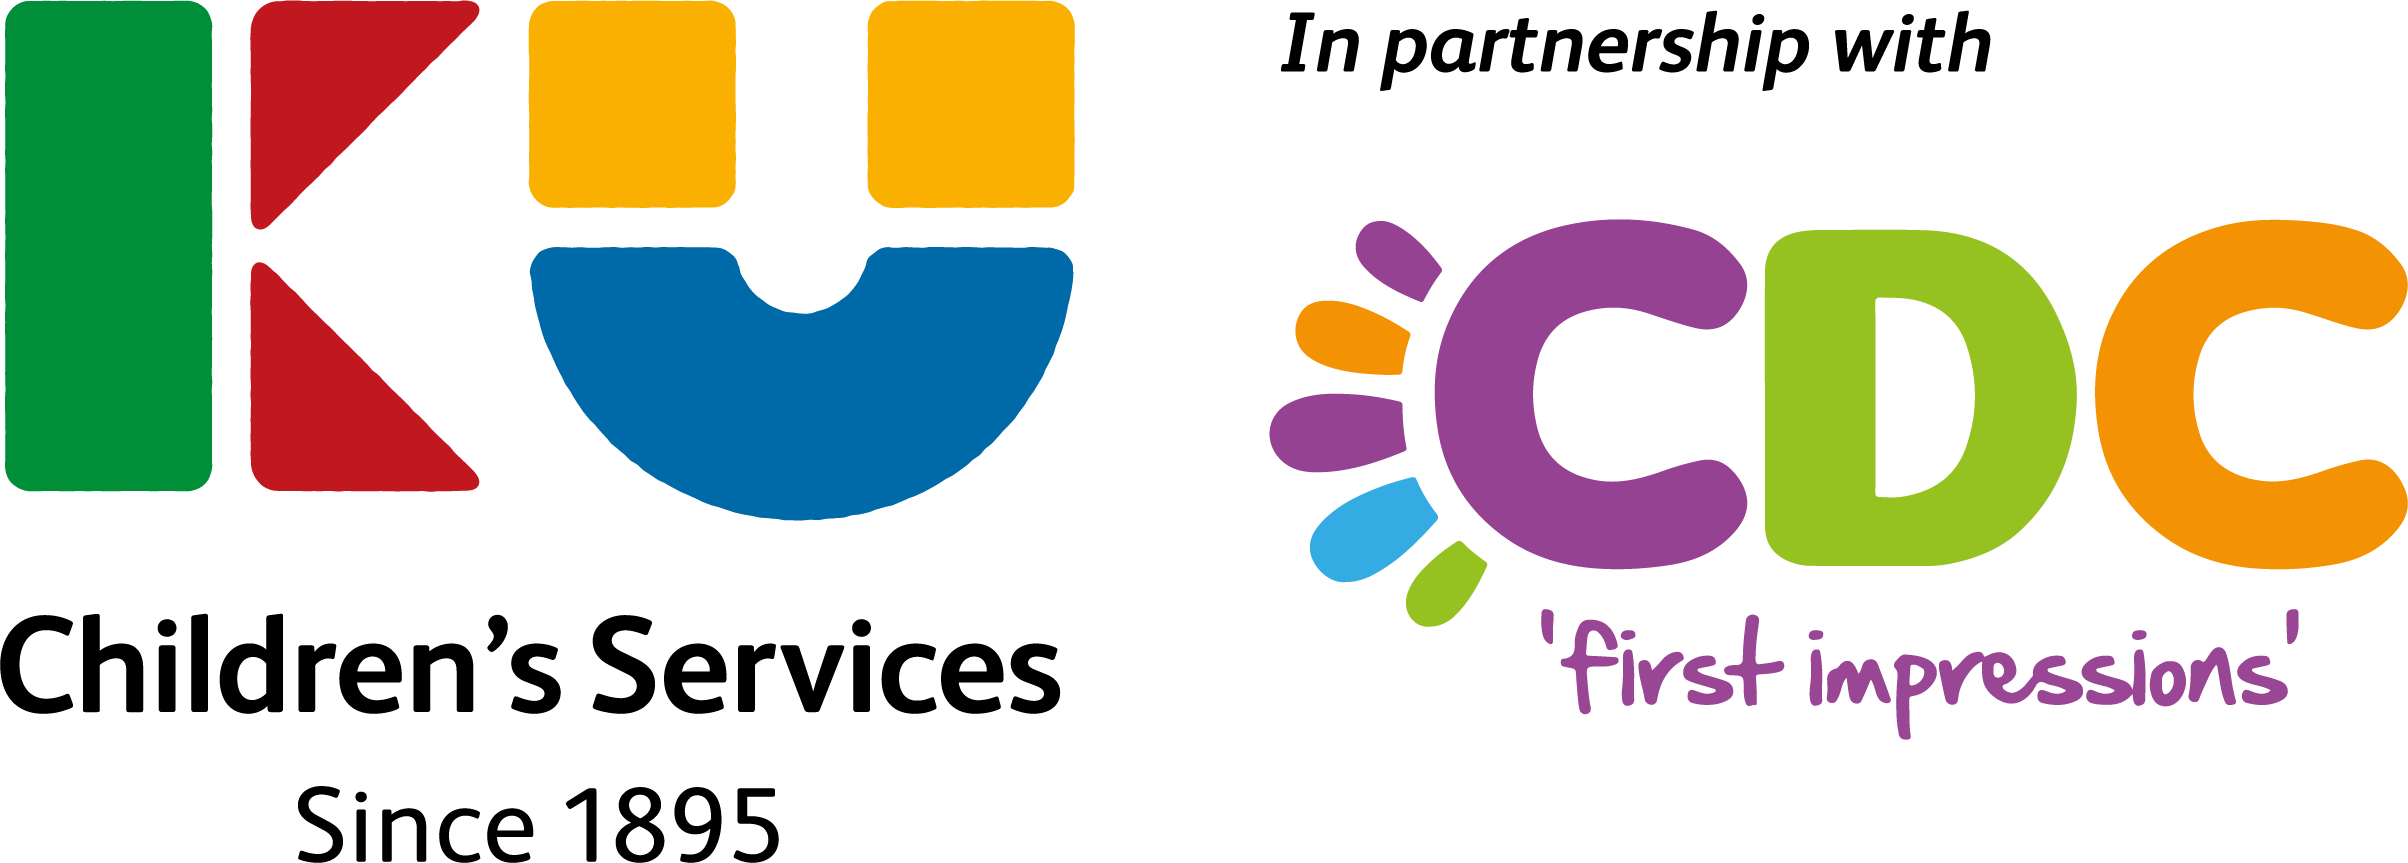 Inclusion Support QLD logo